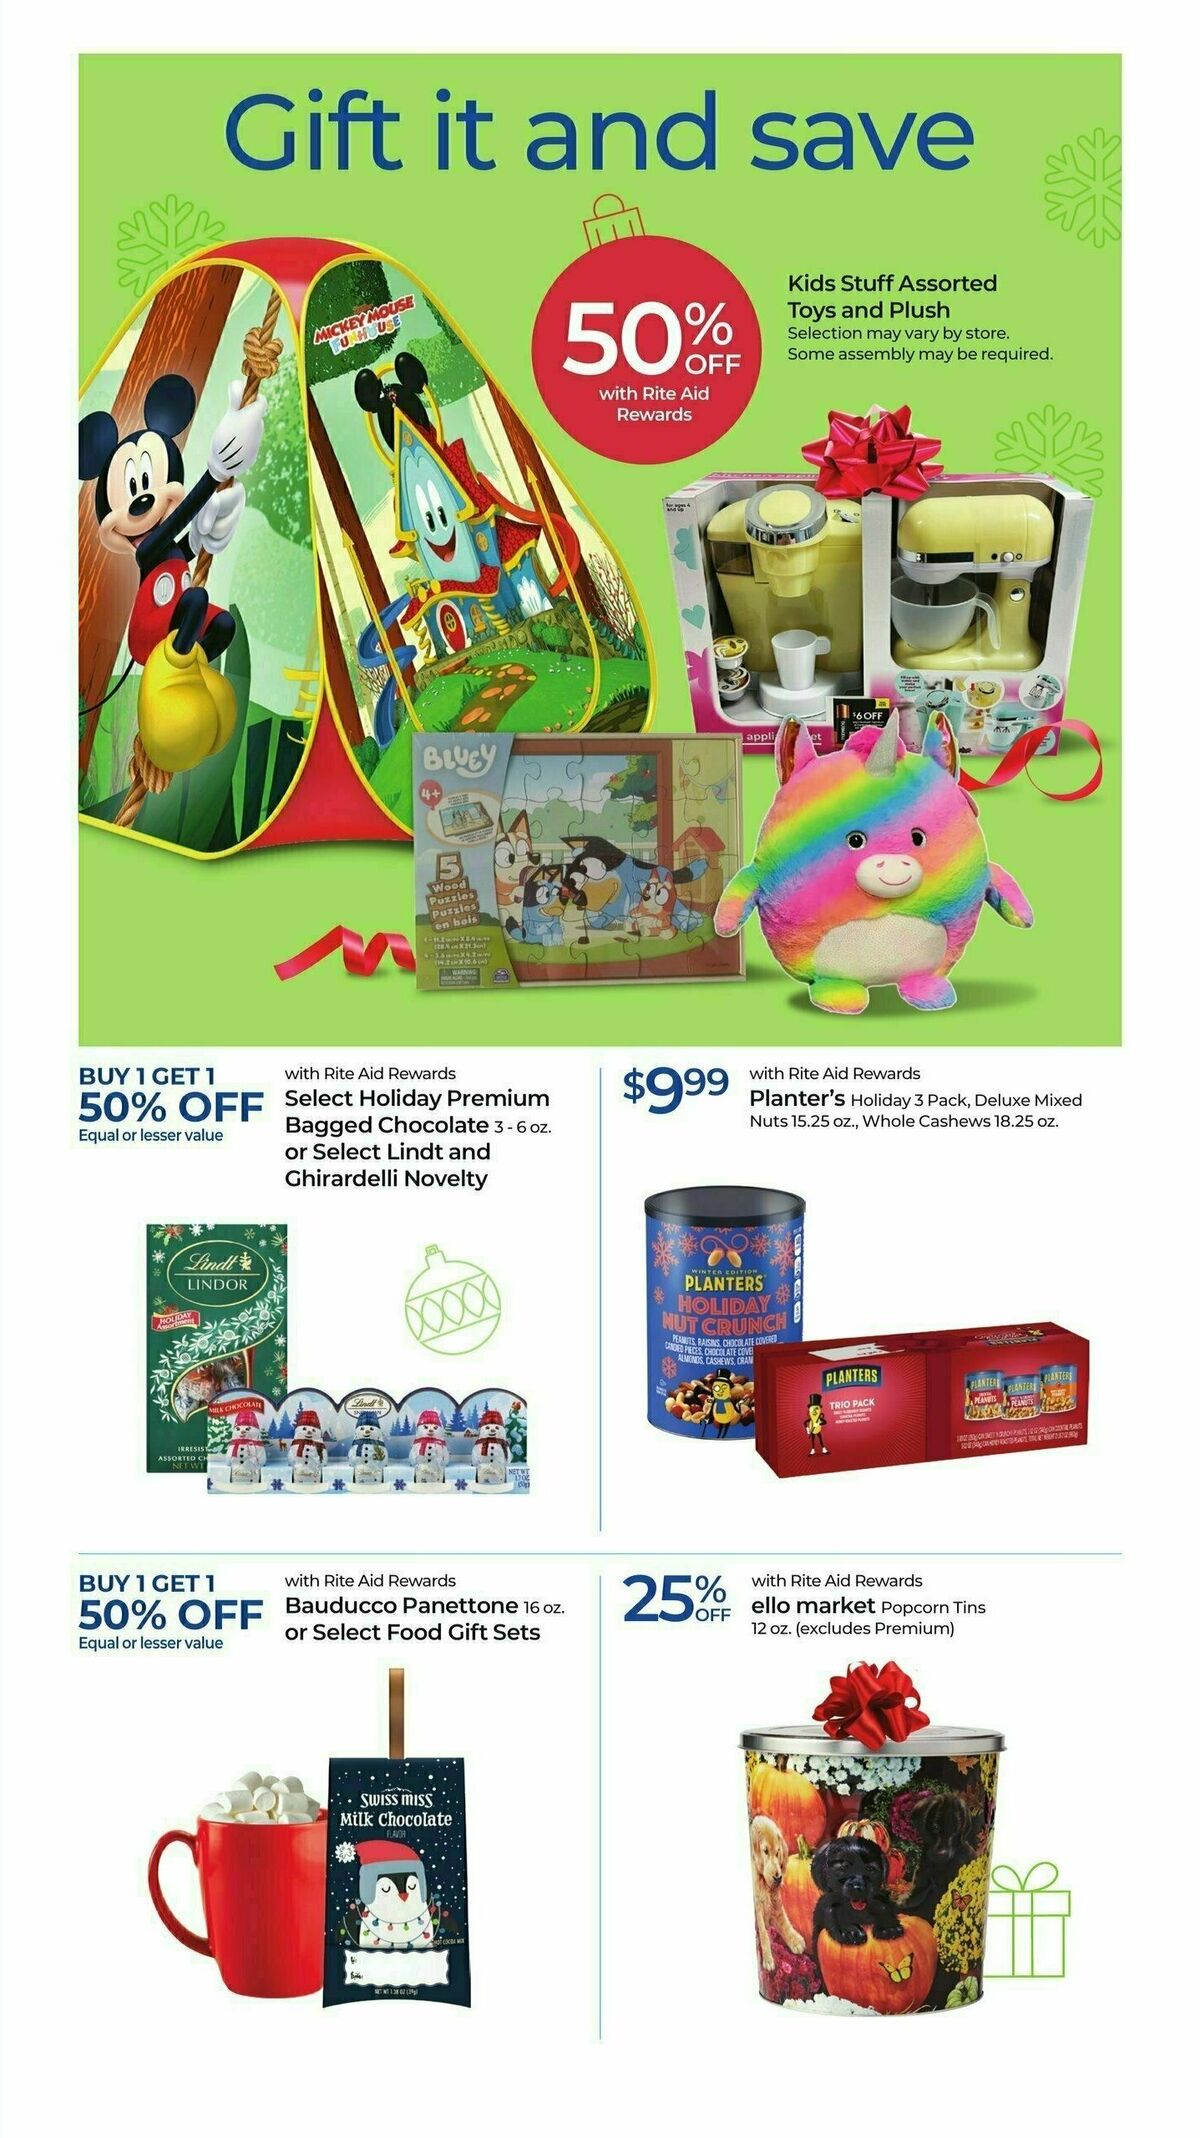 Rite Aid Weekly Ad from November 12